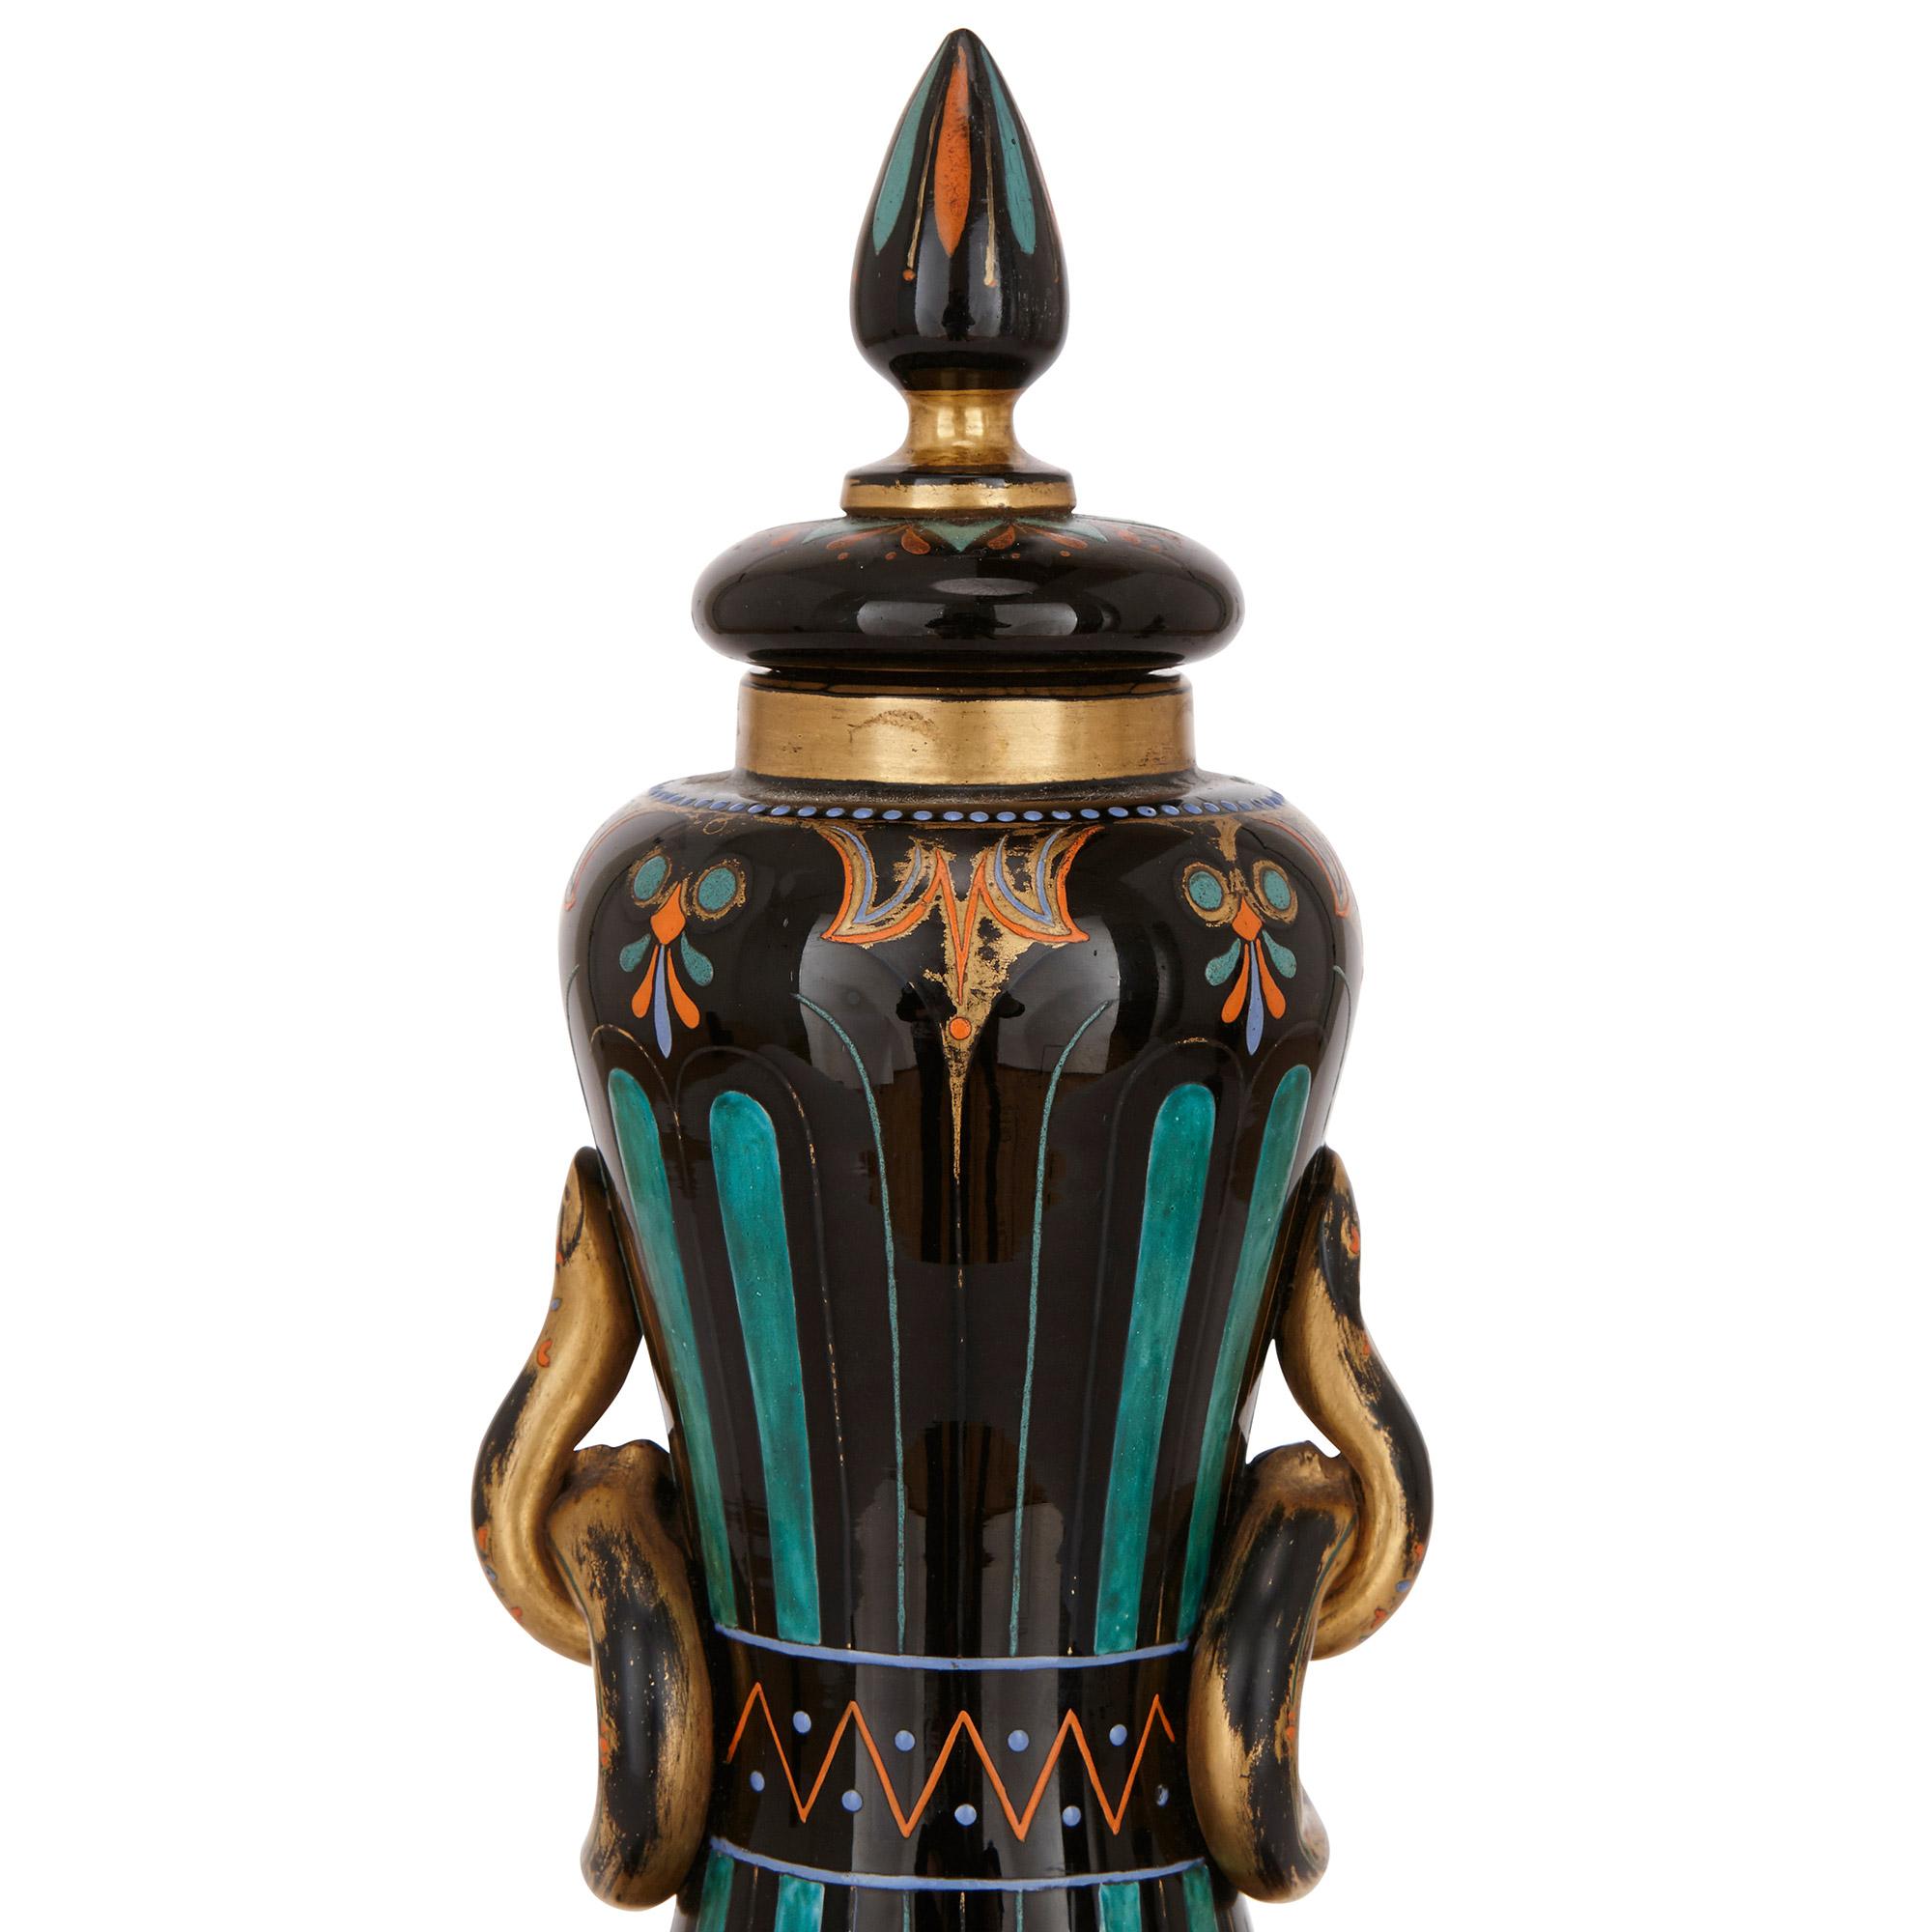 Czech Pair of Antique Bohemian Black Glass Vases in the Egyptian Revival Style